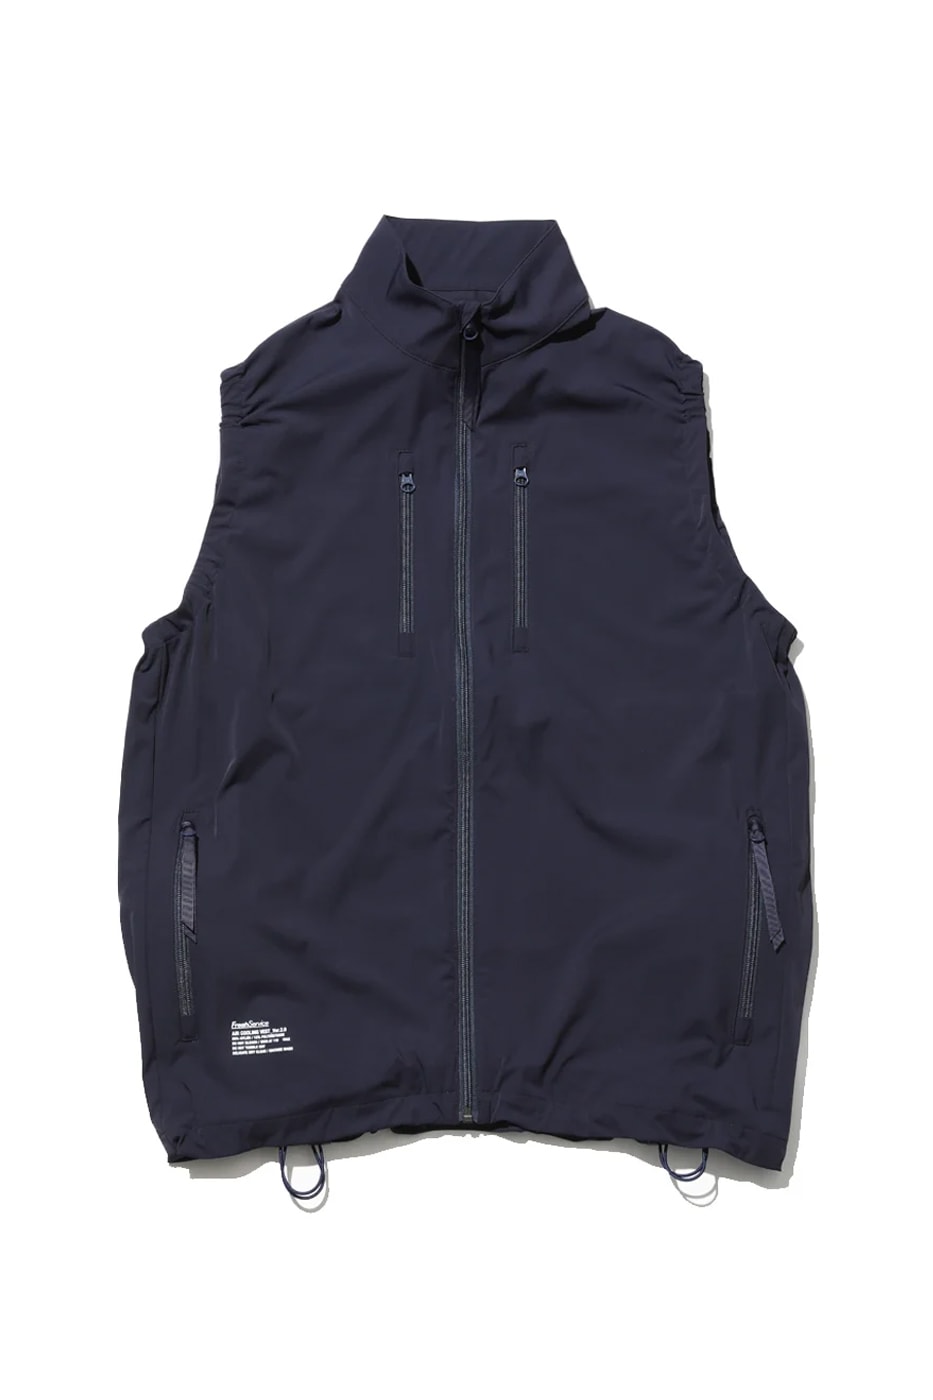 FreshService Is Back With Another Air Cooler Vest Just in Time for Upcoming Summer Season